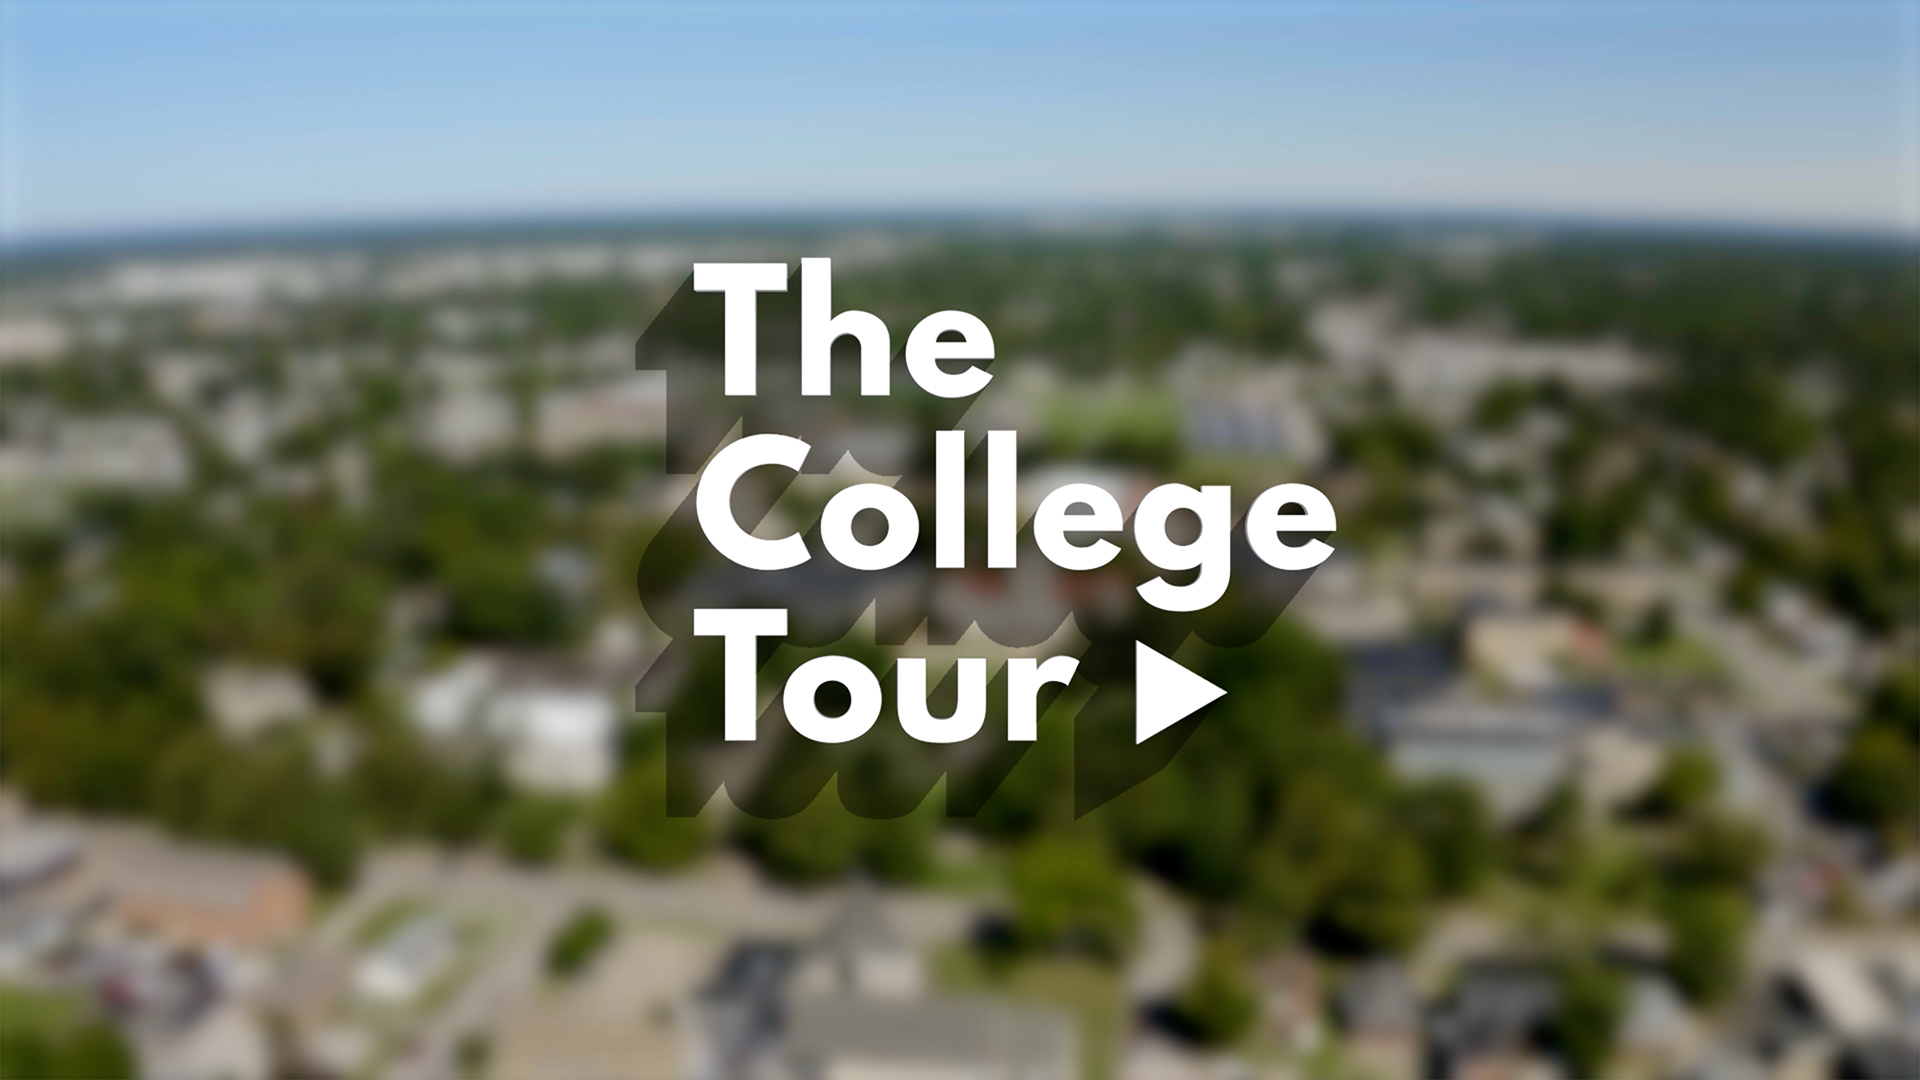 The College Tour Episode title card